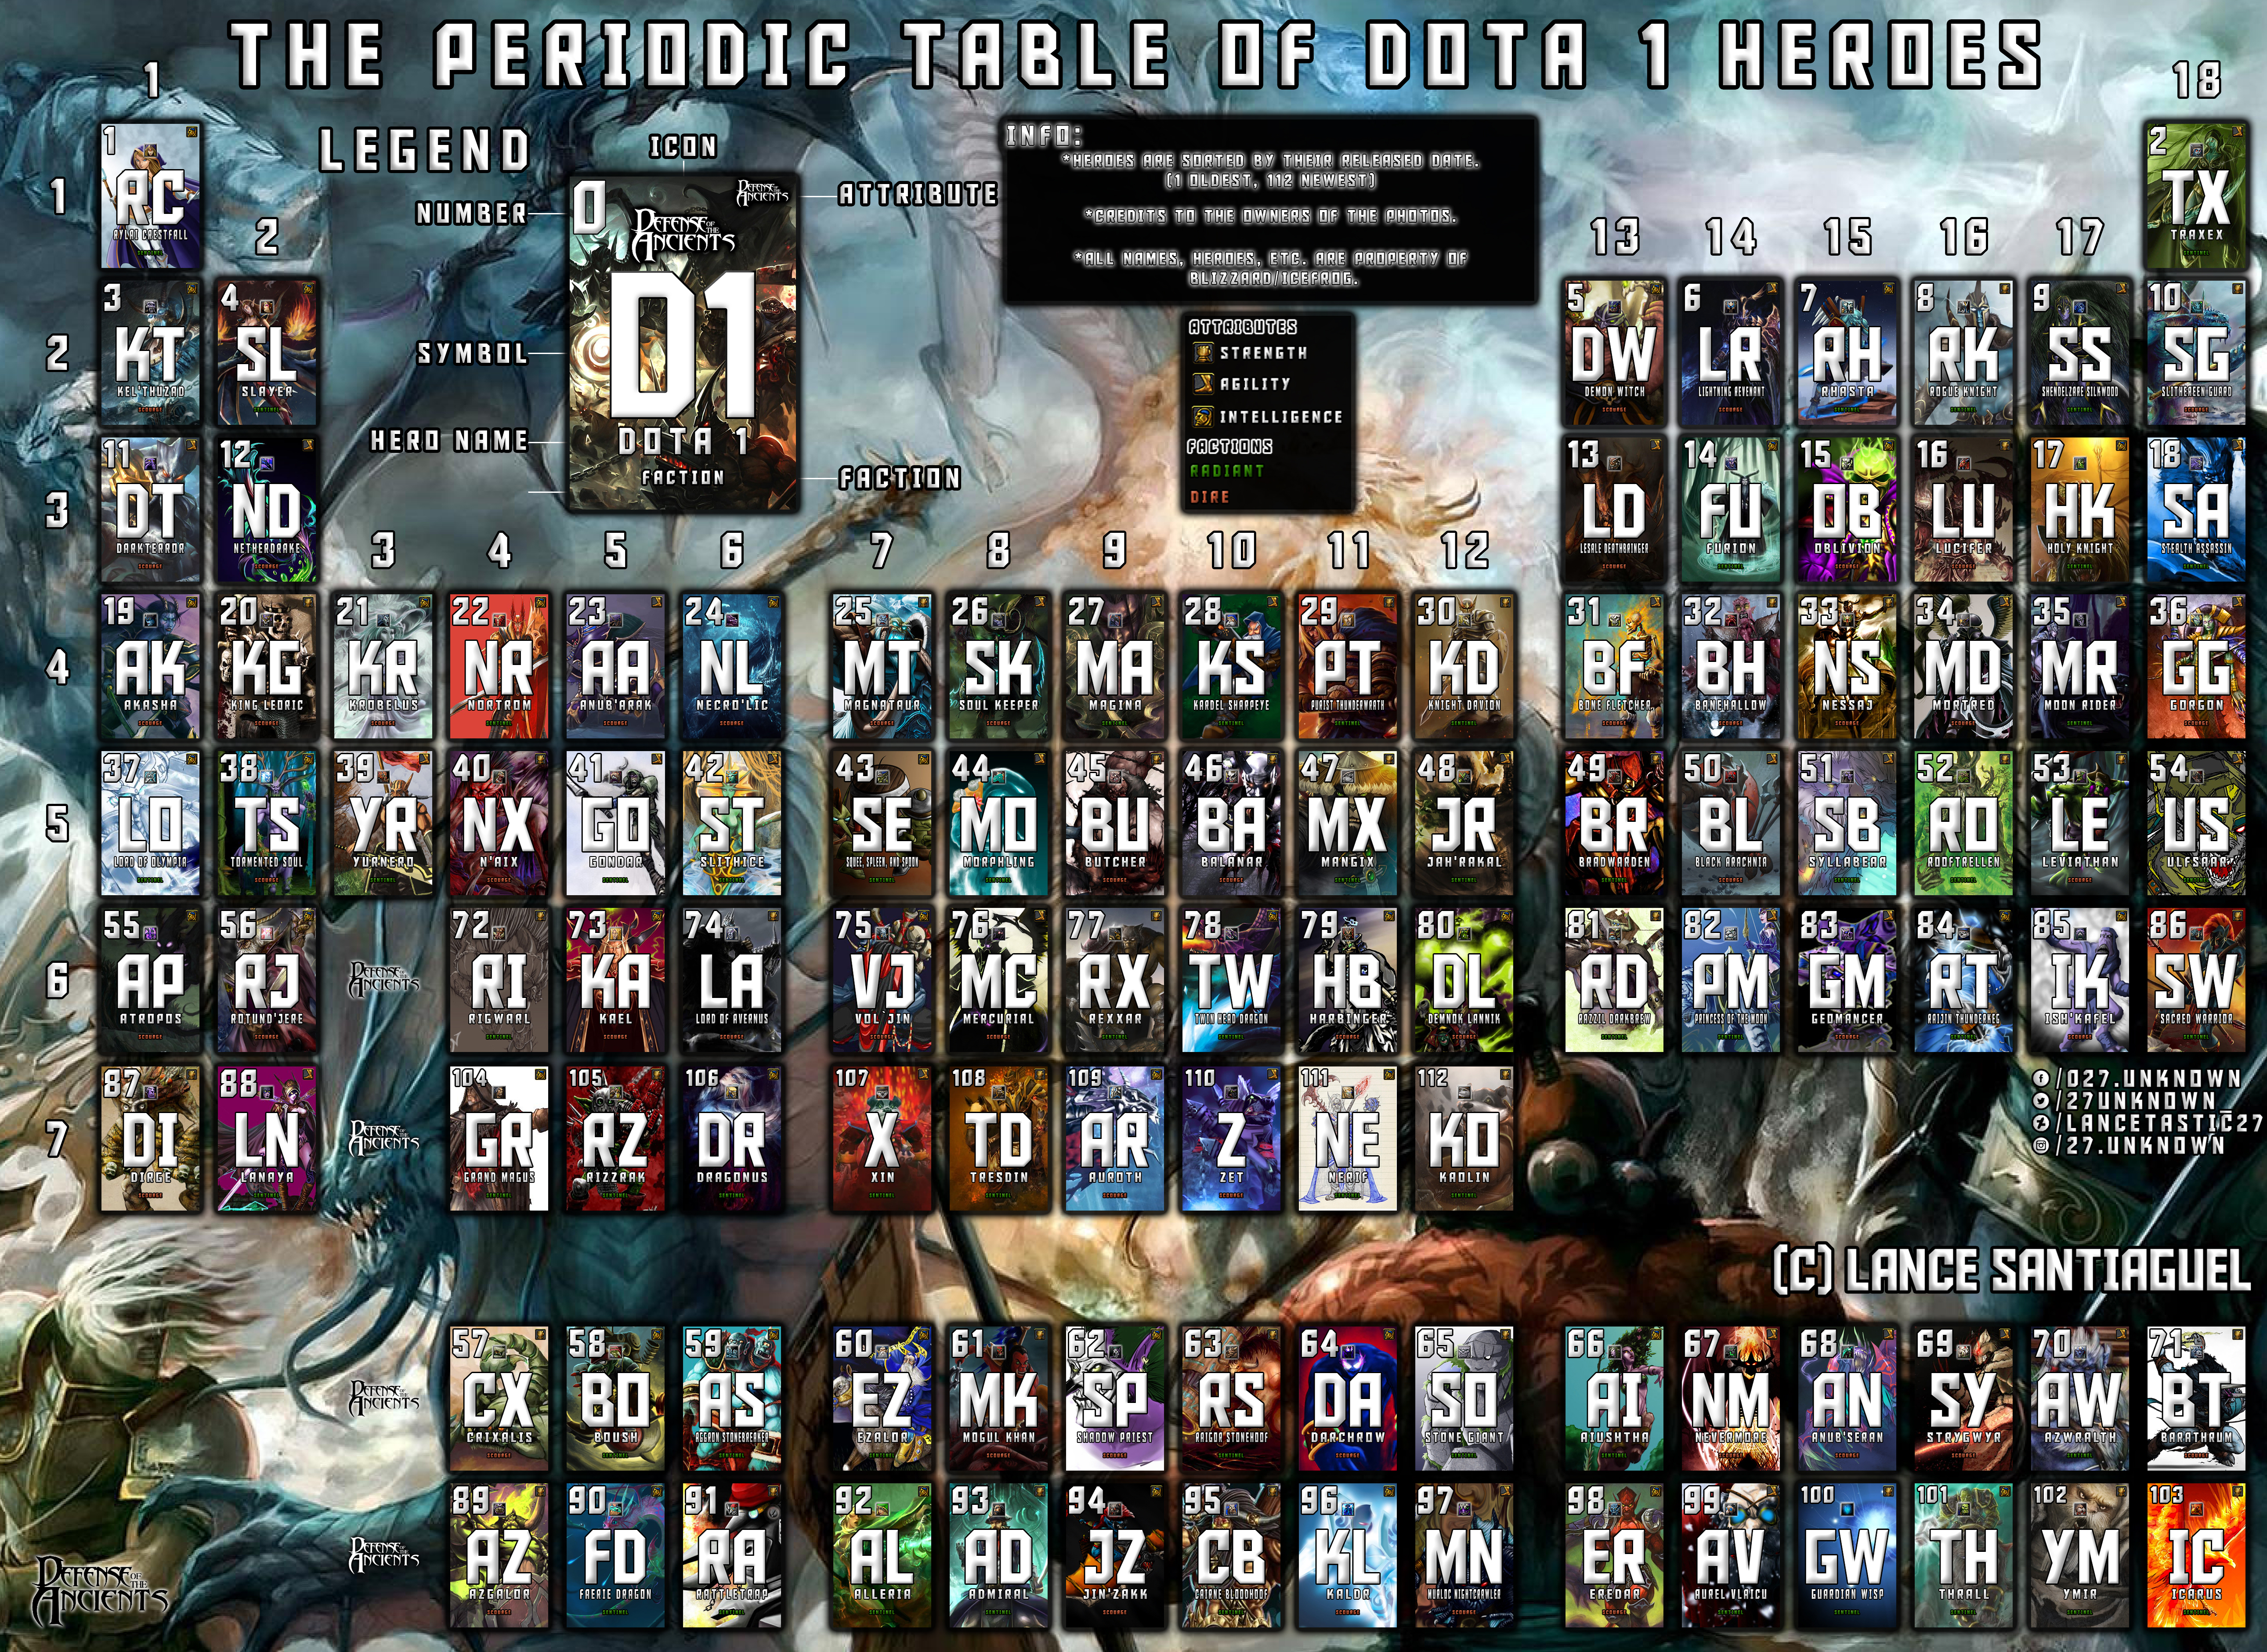 The Periodic Table Of Dota 1 Heroes By Lancetastic27 On Deviantart